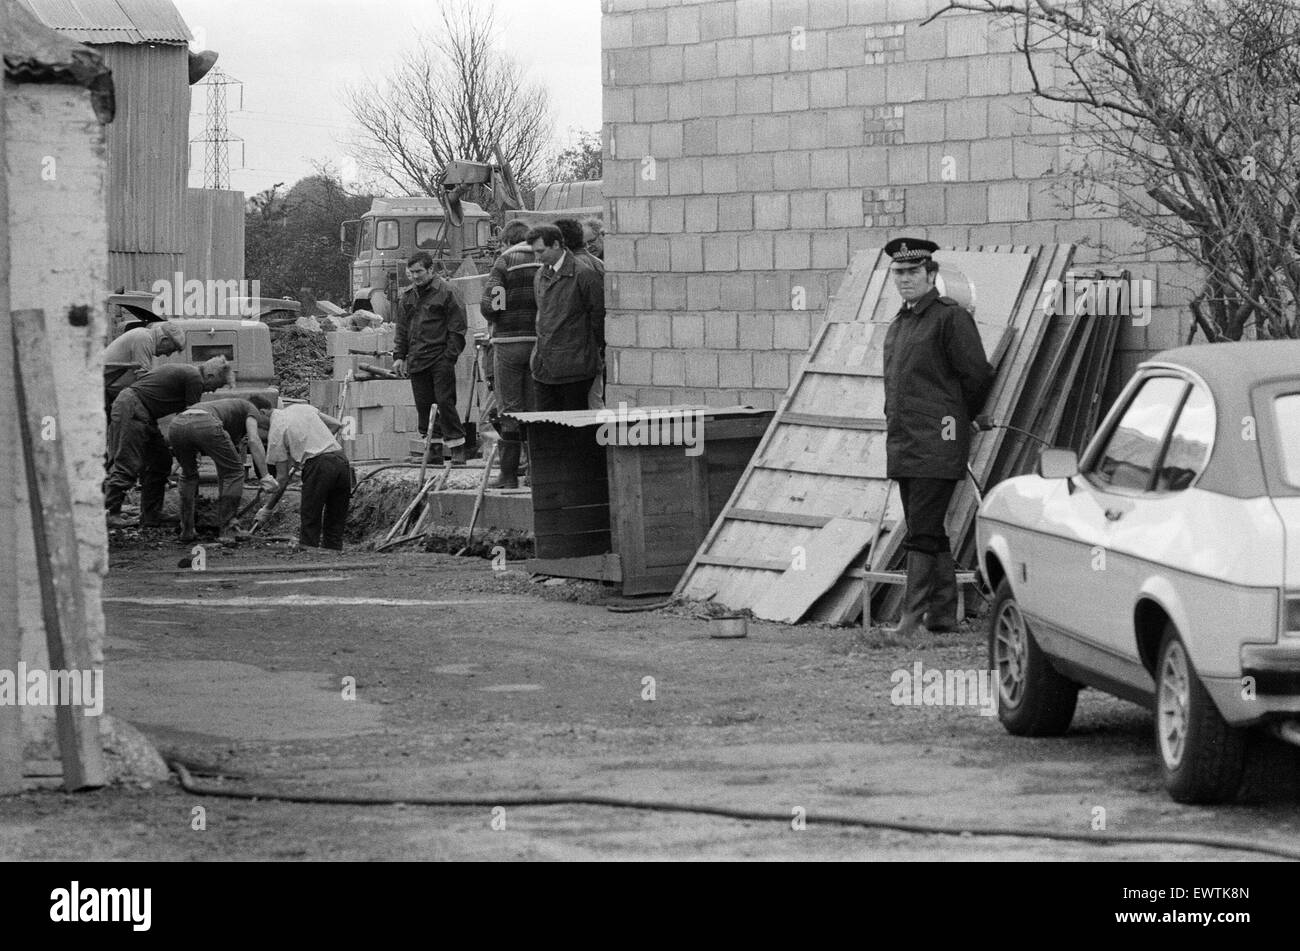 Police Investigation into disappearance of haulage contractor  George Brett and his son Terry Brett aged 10, who are missing under mysterious circumstances. Pictured, Police search Mount Pleasant Farm at Hornchurch, Essex, 12th October 1976. Stock Photo